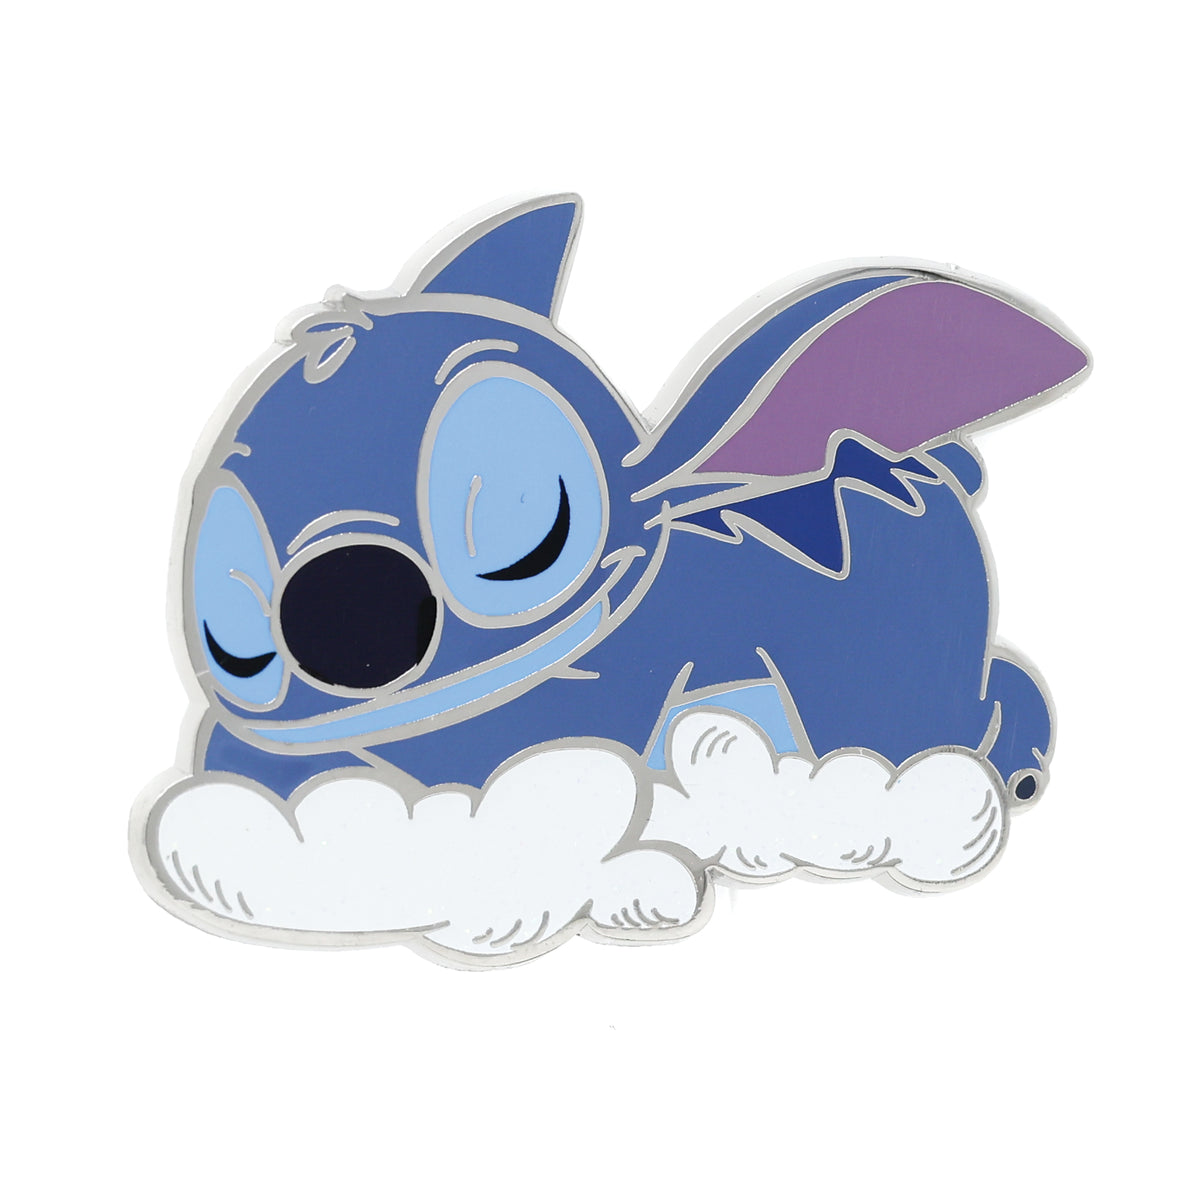 Disney Stitch Sleeping Special Edition 500 Pin - NEW RELEASE